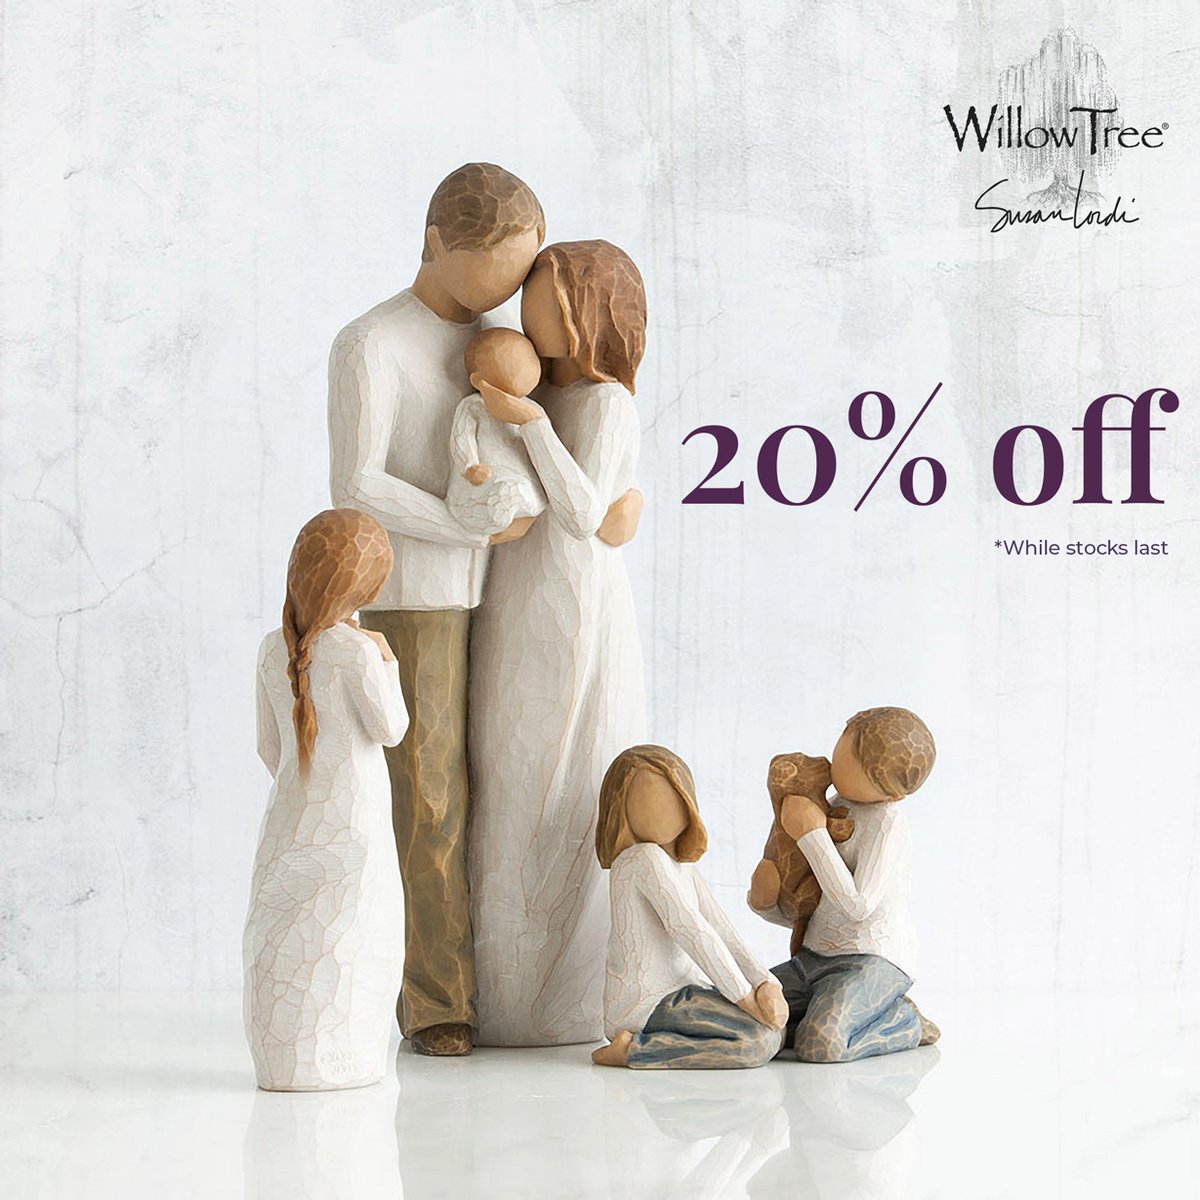 20% off Willow Tree figurines at @fhindsjewellers. These thoughtful figurines by artist Susan Lordi speak in quiet ways to heal, comfort, protect and inspire. Shop the range at F.Hinds today with 20% off until 15 November!